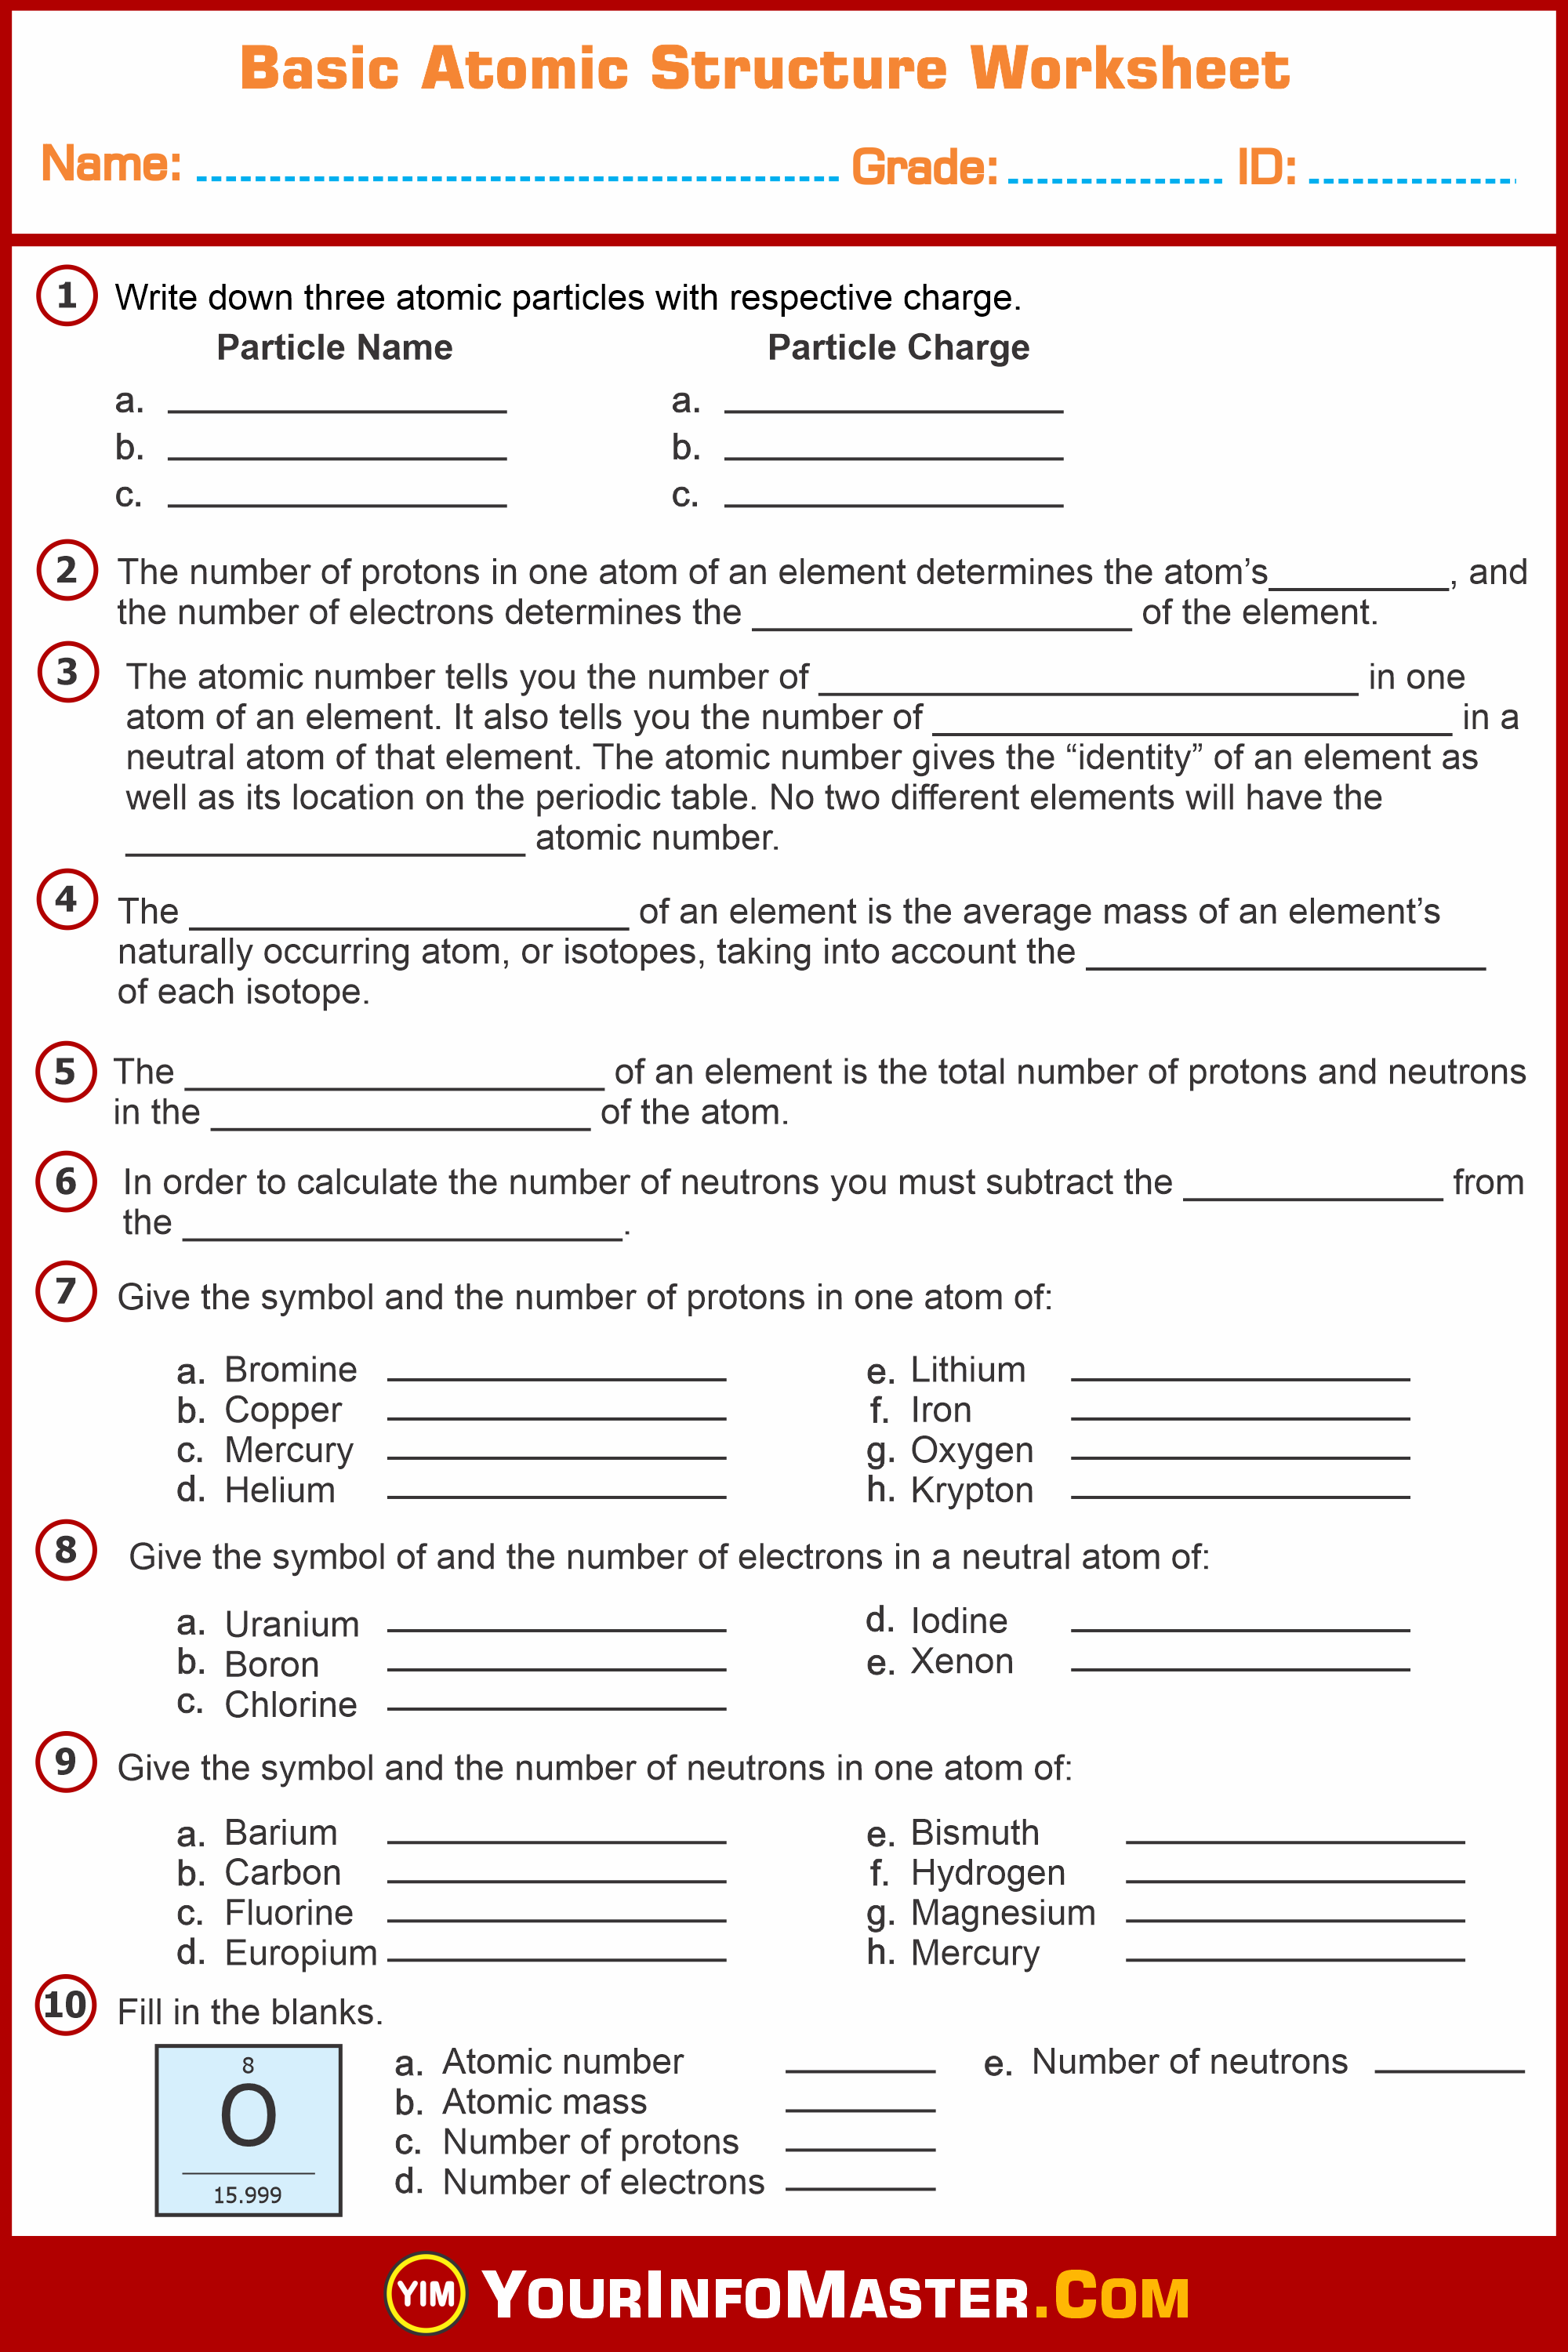 Basic Atomic Structure Worksheet - Your Info Master Intended For Atomic Structure Worksheet Answers